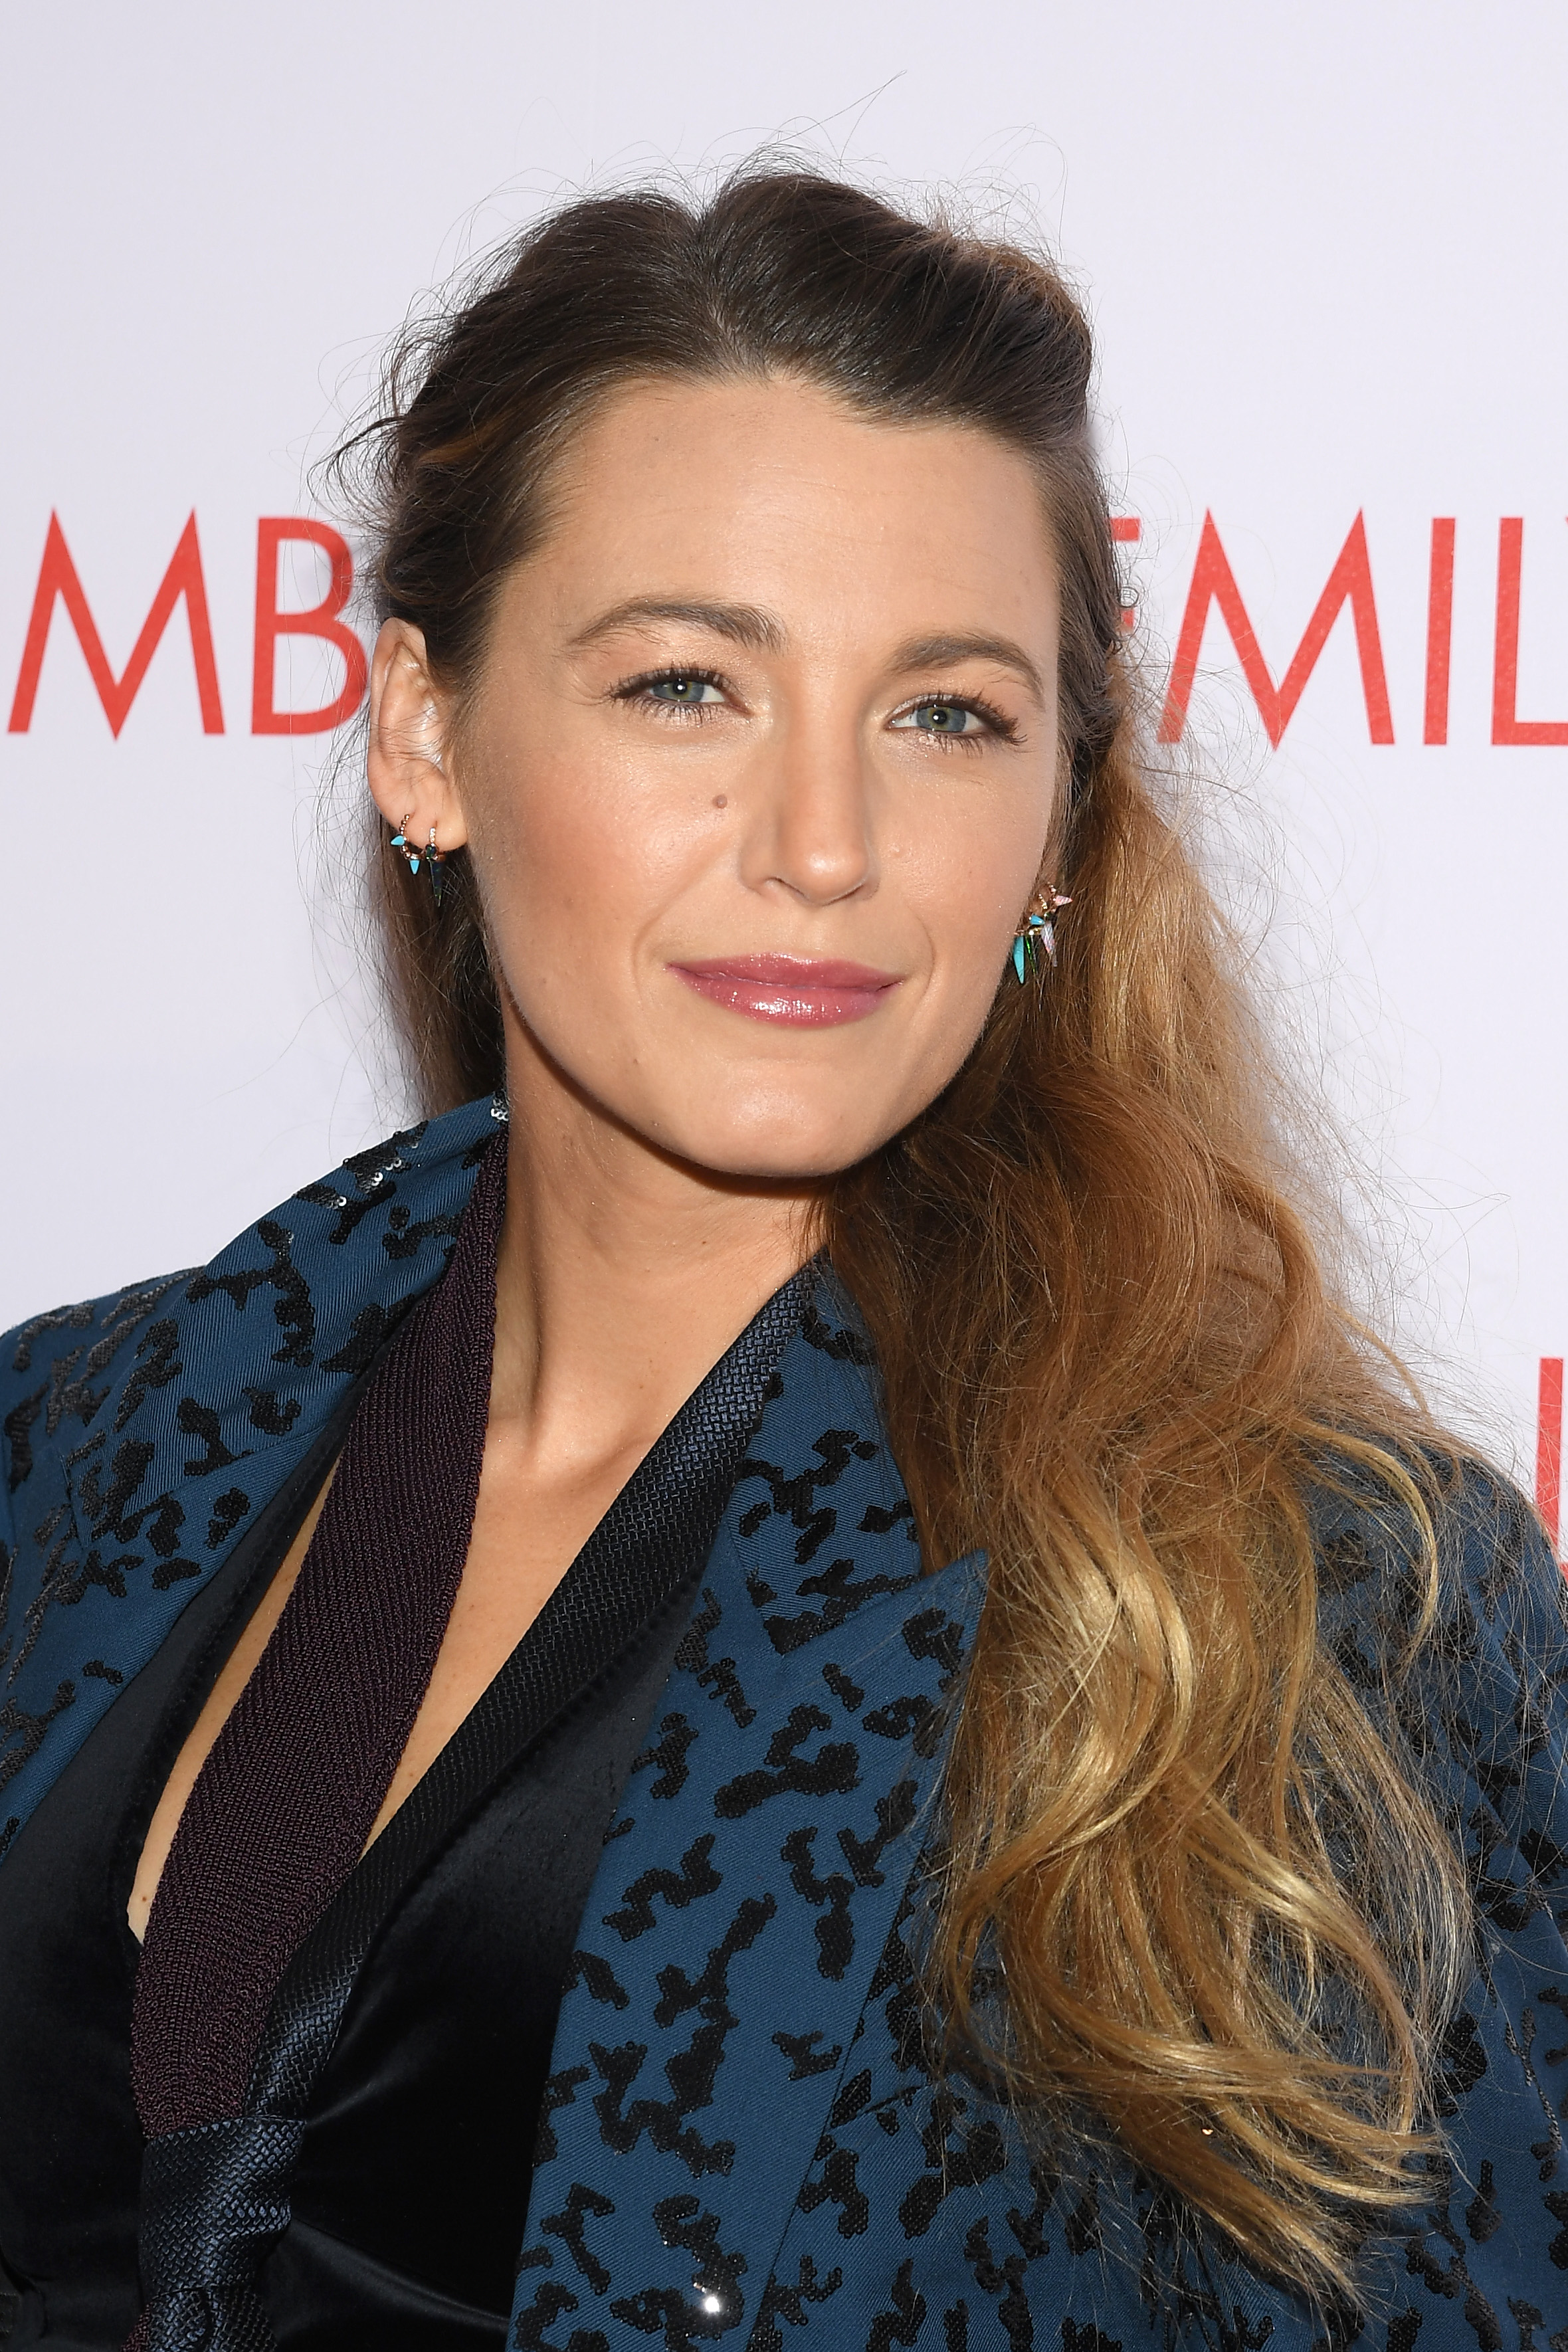 Blake Lively attends "L'Ombre D'Emilie - A Simple Favor" premiere on September 18, 2018 in Paris, France | Source: Getty Images